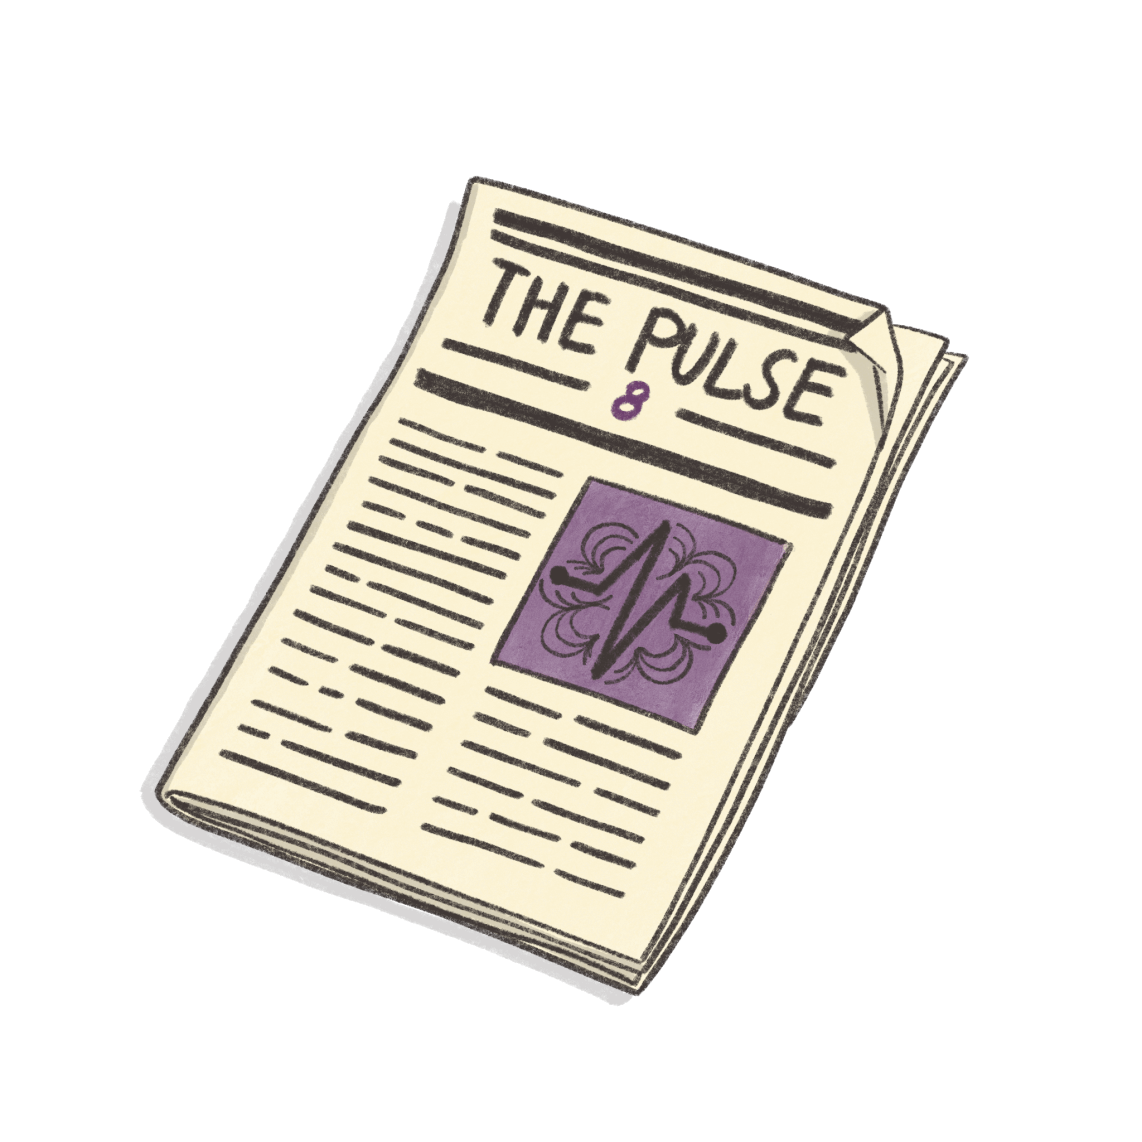 The Apoio Pulse – Issue Eight